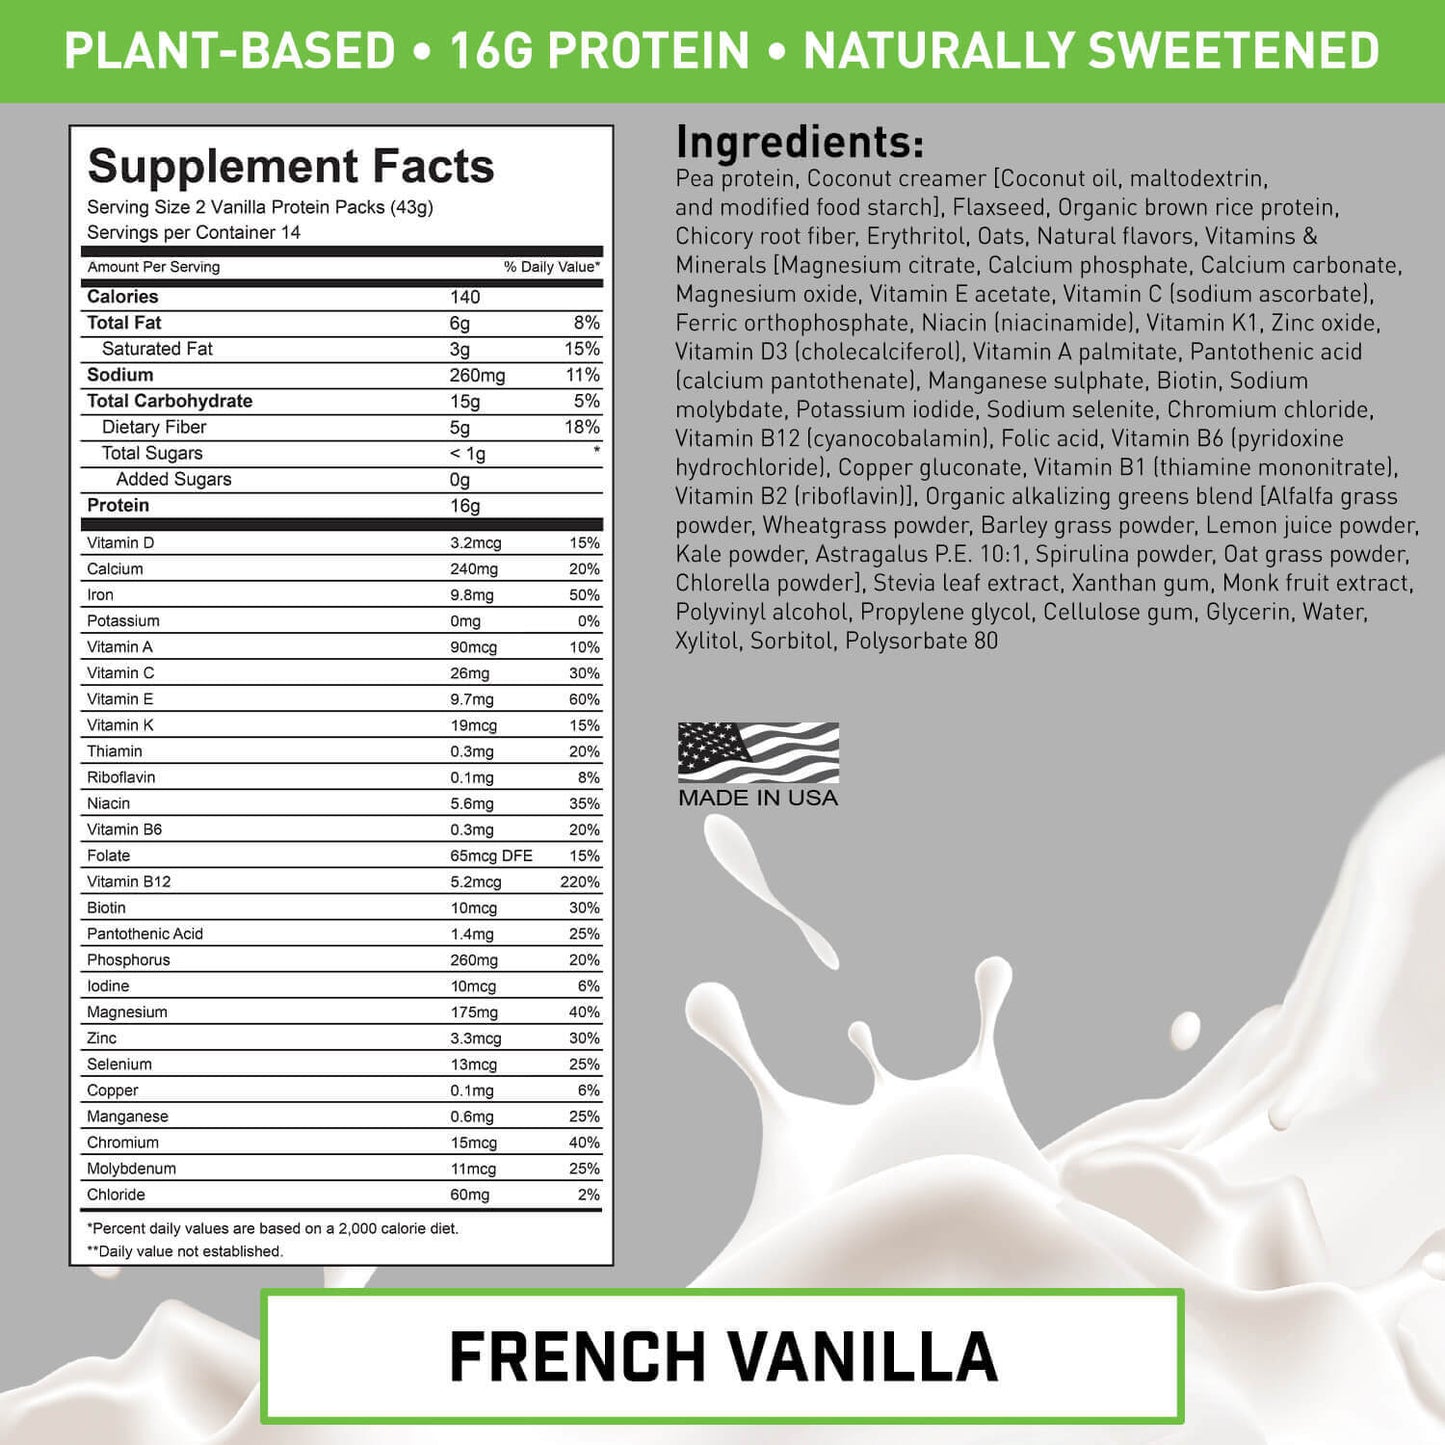 PLANT-BASED MEAL REPLACEMENT FRENCH VANILLA